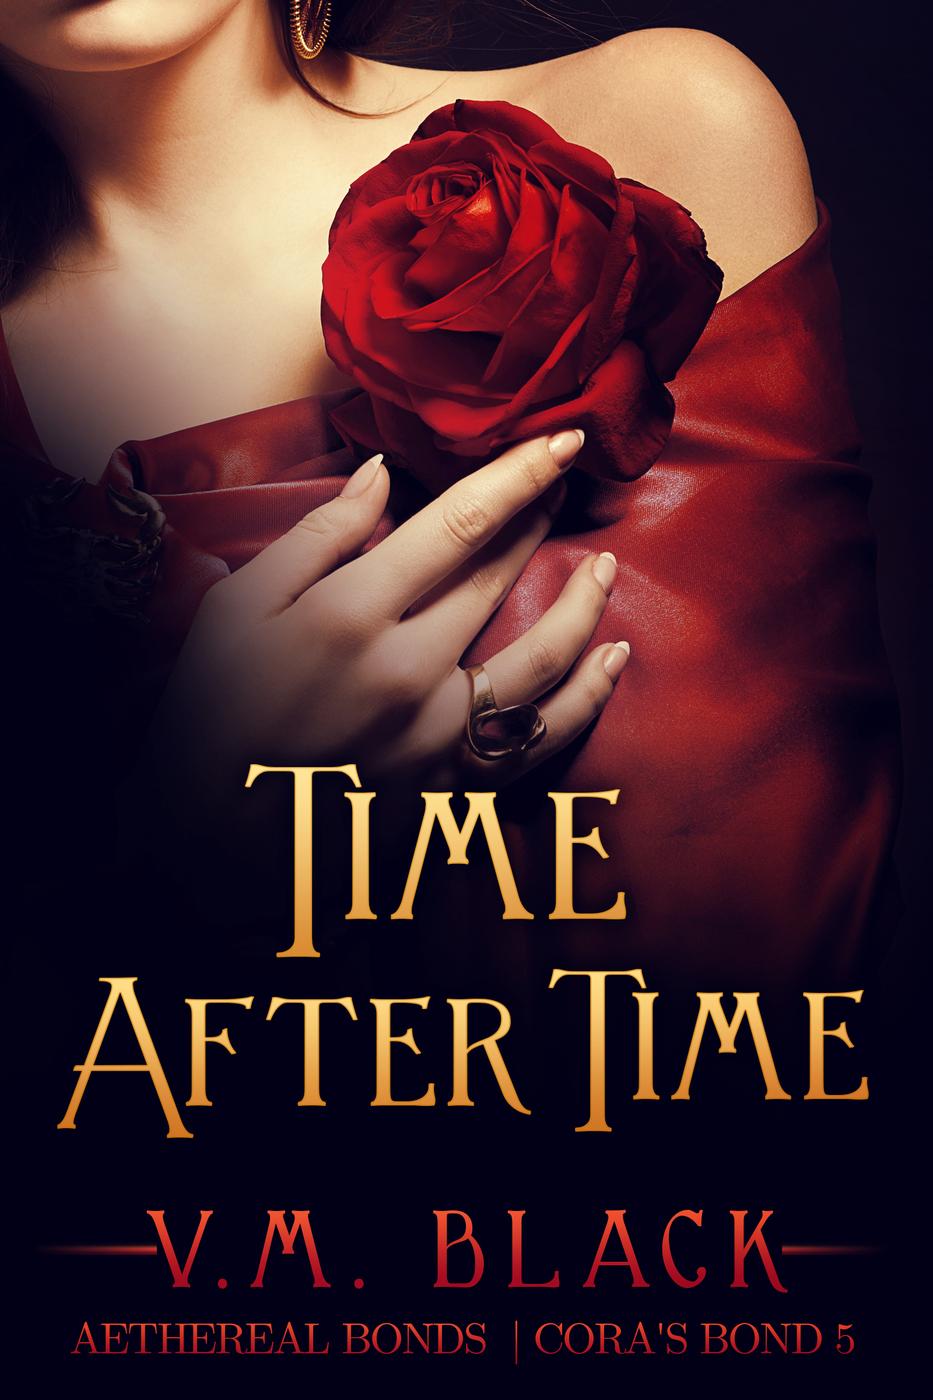 Time After Time (Cora's Bond) (2015)